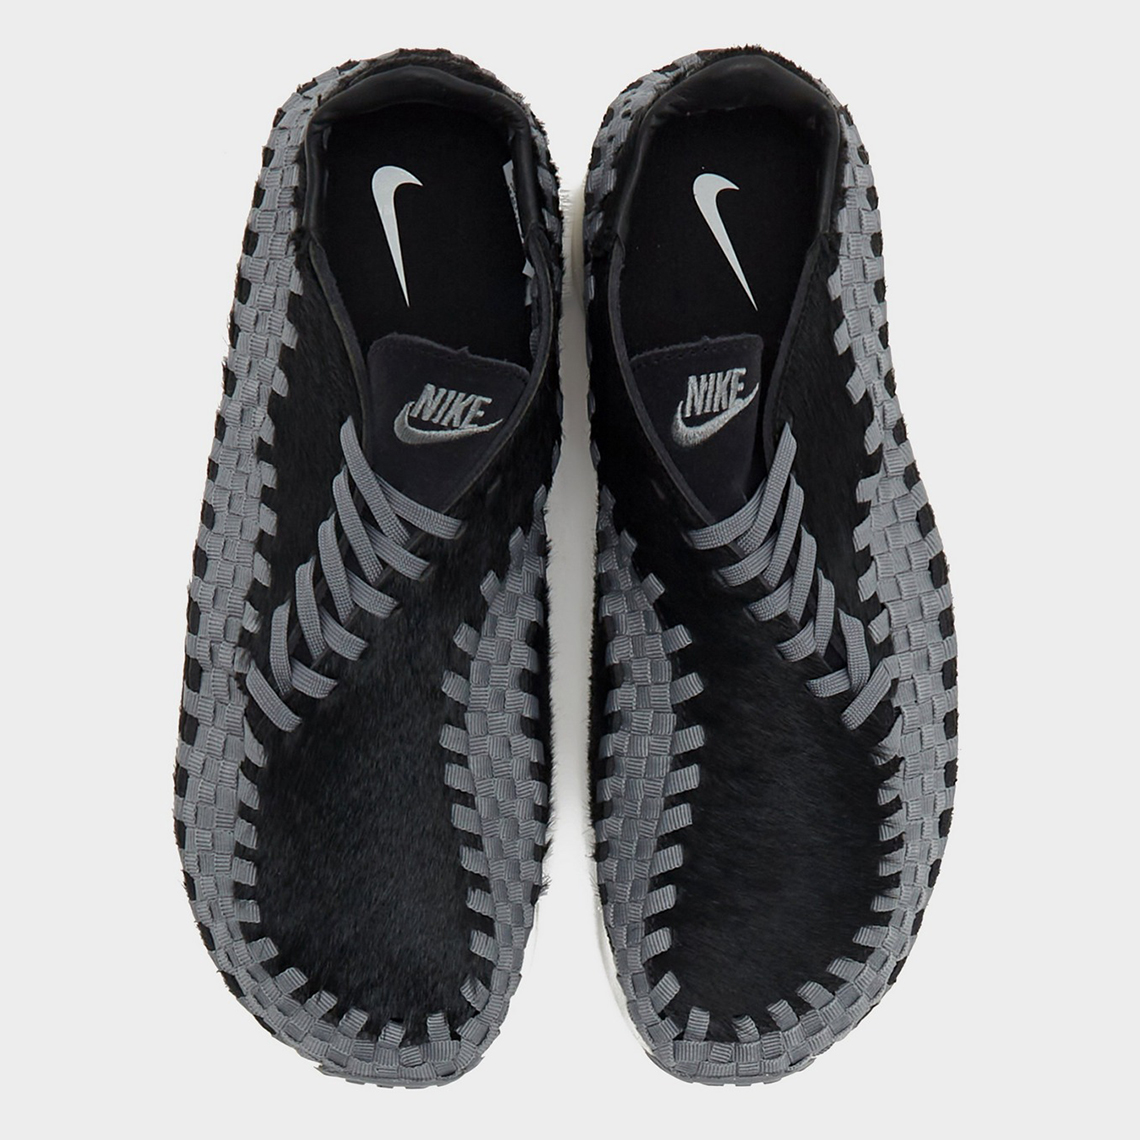 Nike cleaner Footscape Woven Black Grey Fb1959 001 1